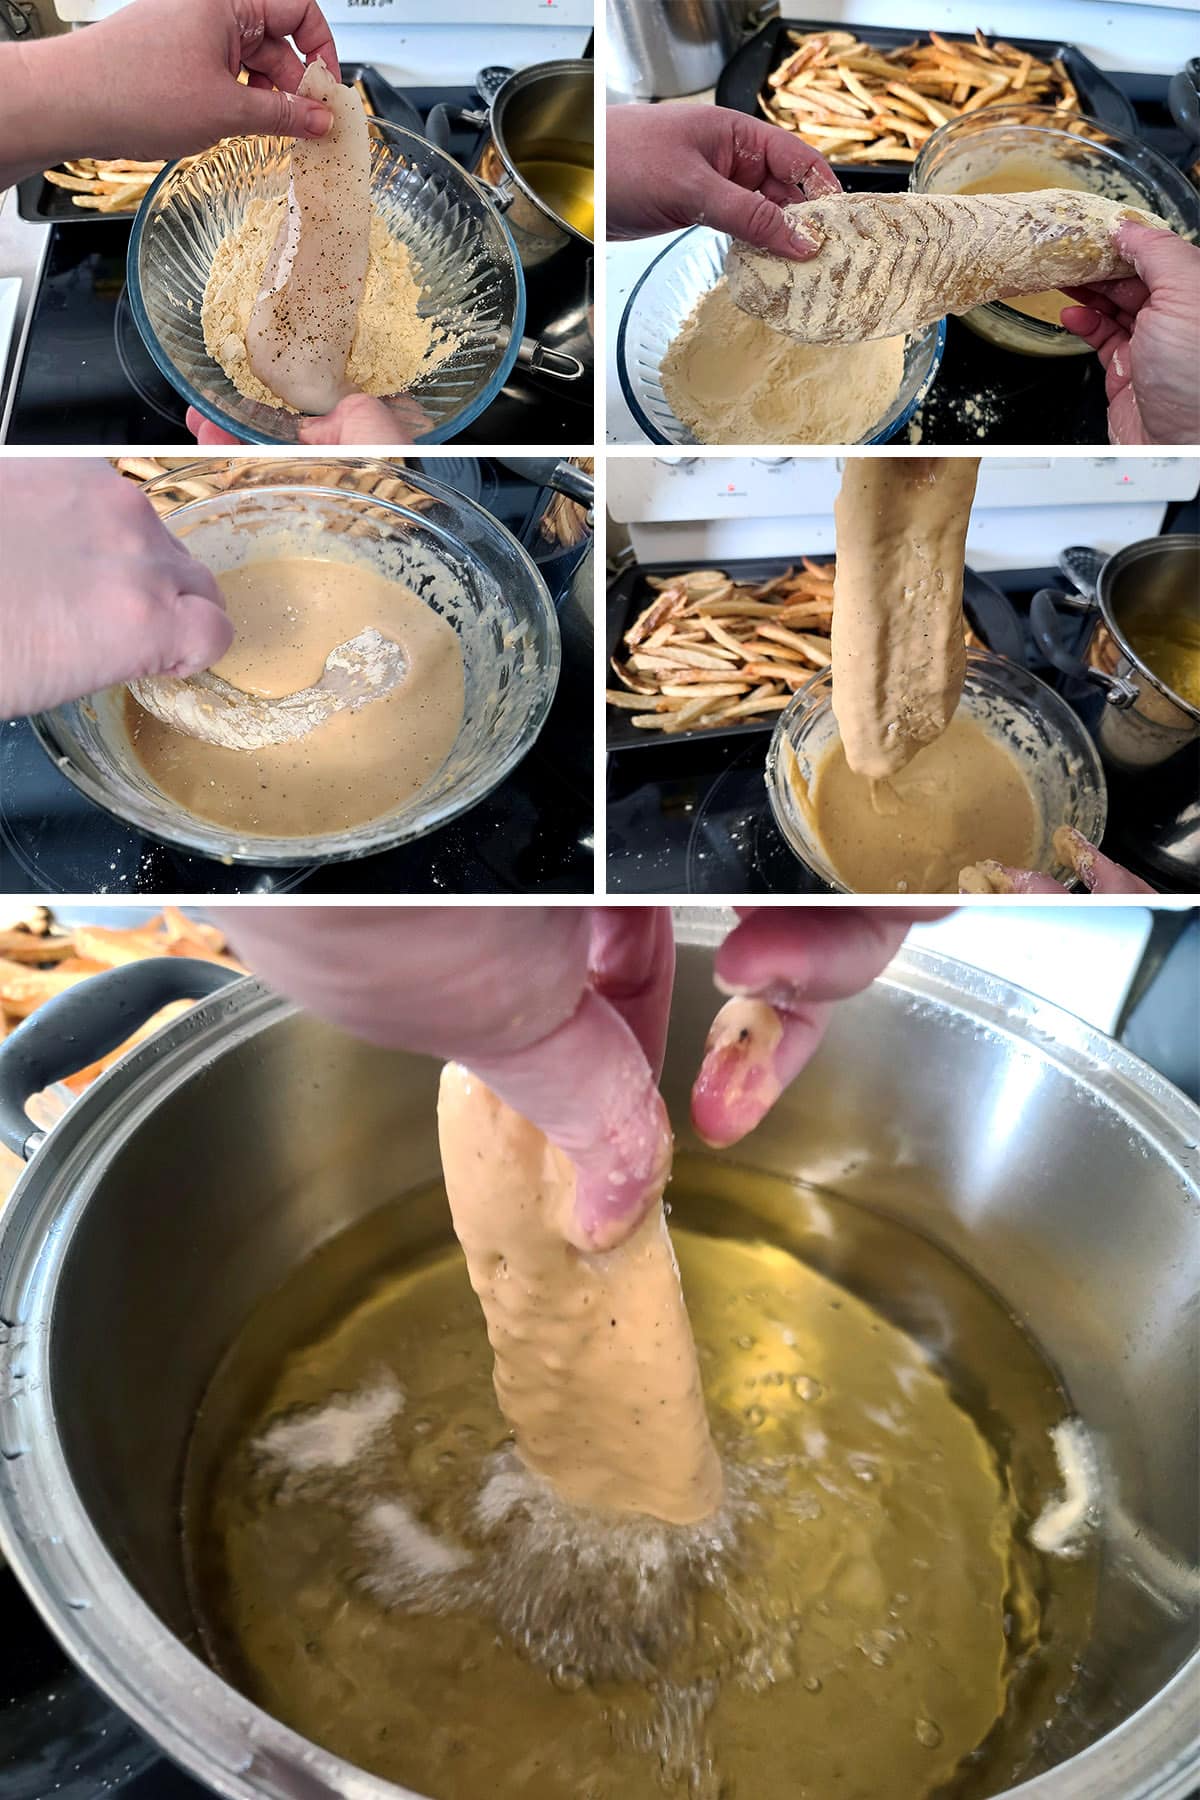 A 5 part image showing a fish fillet being dredged in chickpea flour, dunked in batter, the batter dripping off, and the fish being placed in a pot of hot oil.